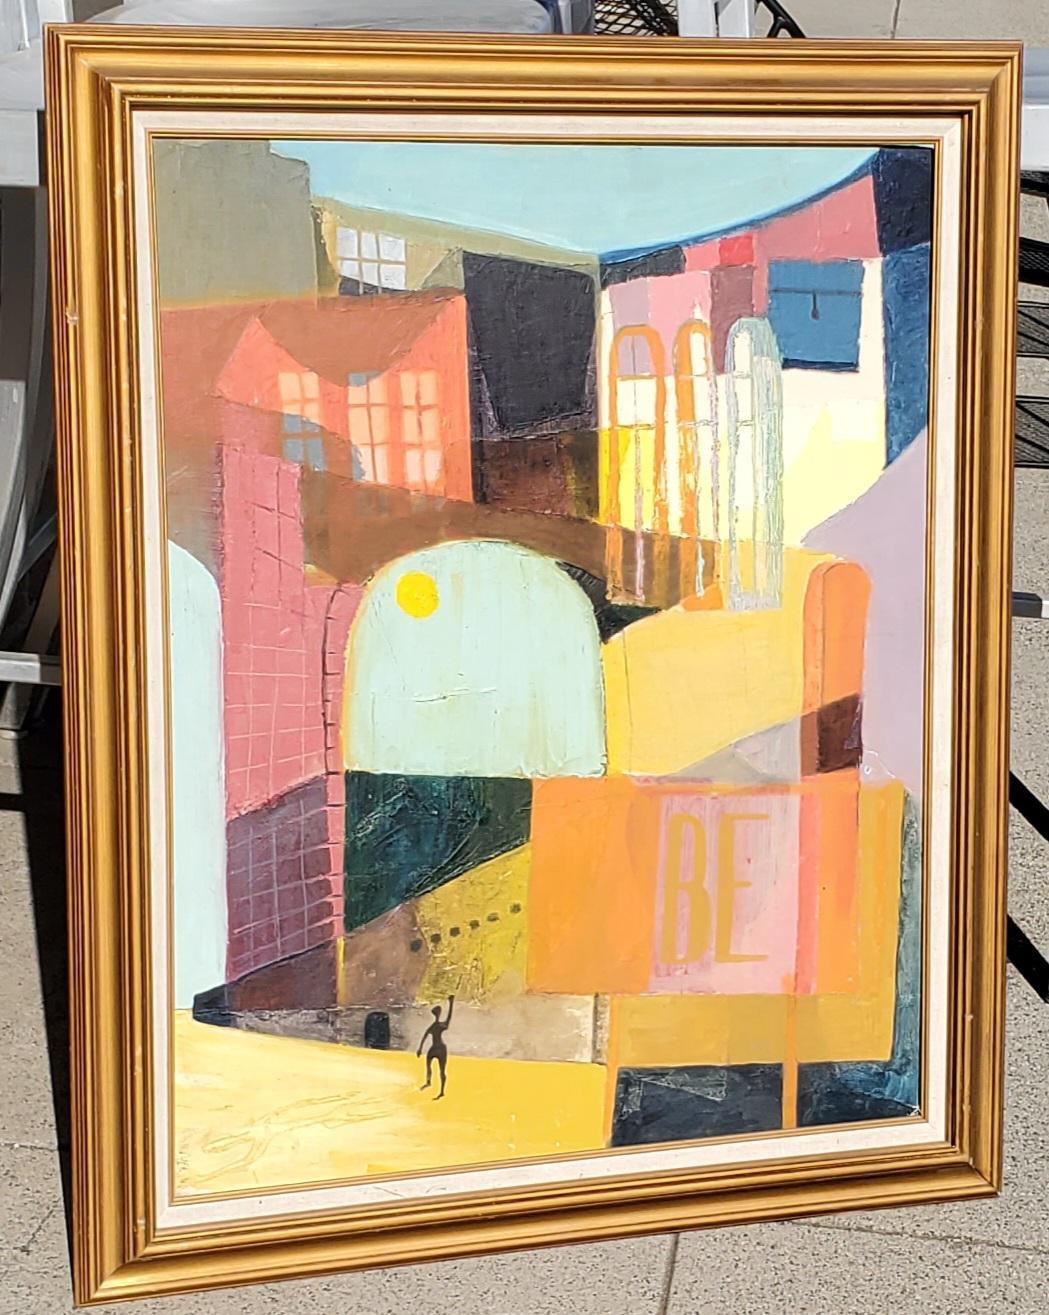 Original 1960s oil painting by well known artist Nan Auldin with original frame.
This is an original Nan Auldin oil painting.
This original oil painting is signed at the lower right hand corner, see pic.
This beautiful oil painting by NAN AULDIN is